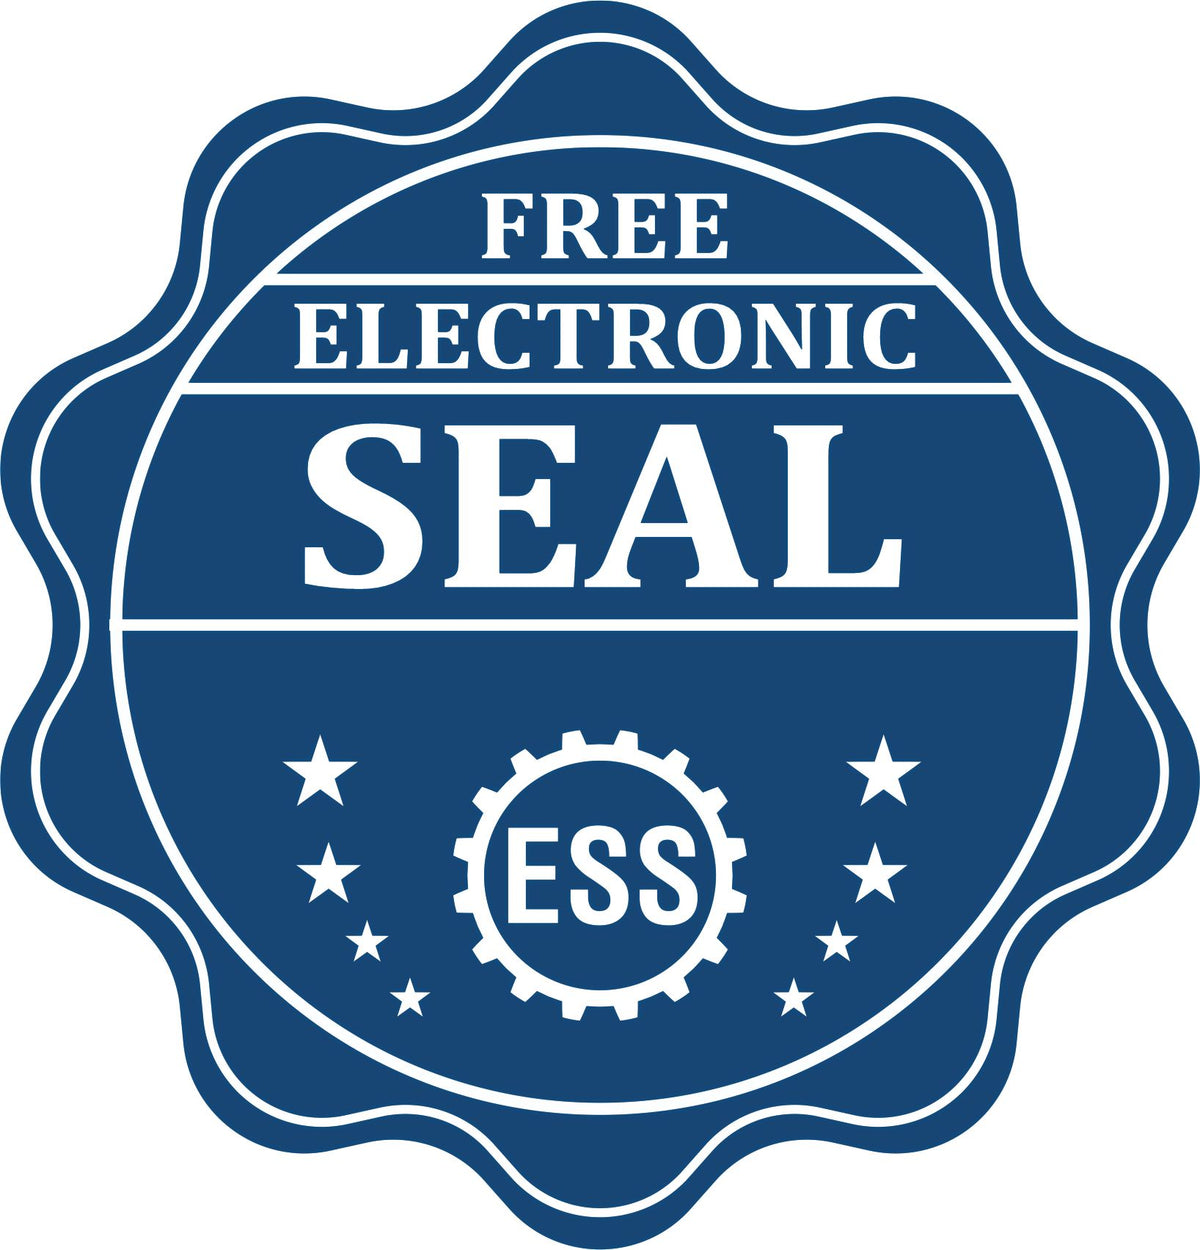 A badge showing a free electronic seal for the PSI Virginia Notary Stamp with stars and the ESS gear on the emblem.